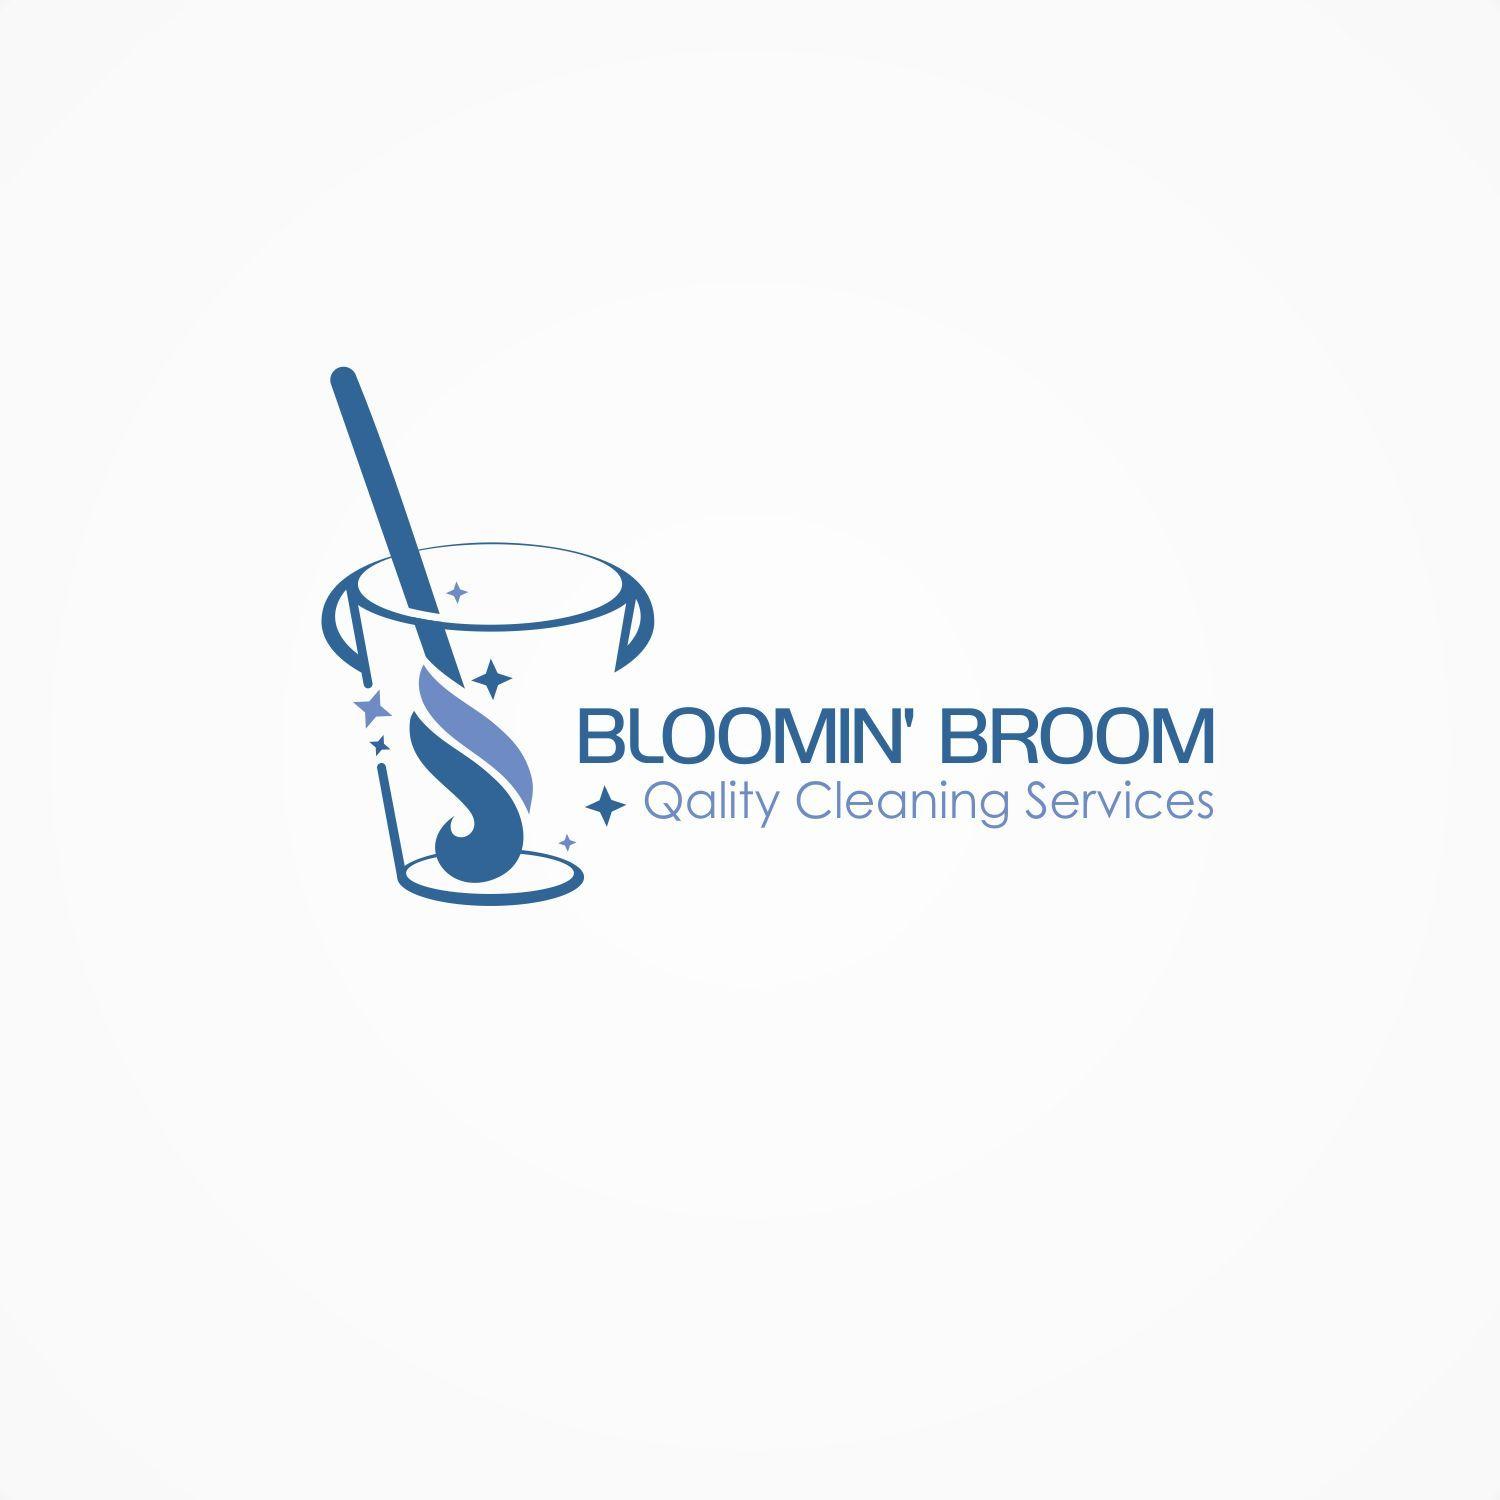 Broom Logo - Bold, Modern, House Cleaning Logo Design for BLOOMIN' BROOM Quality